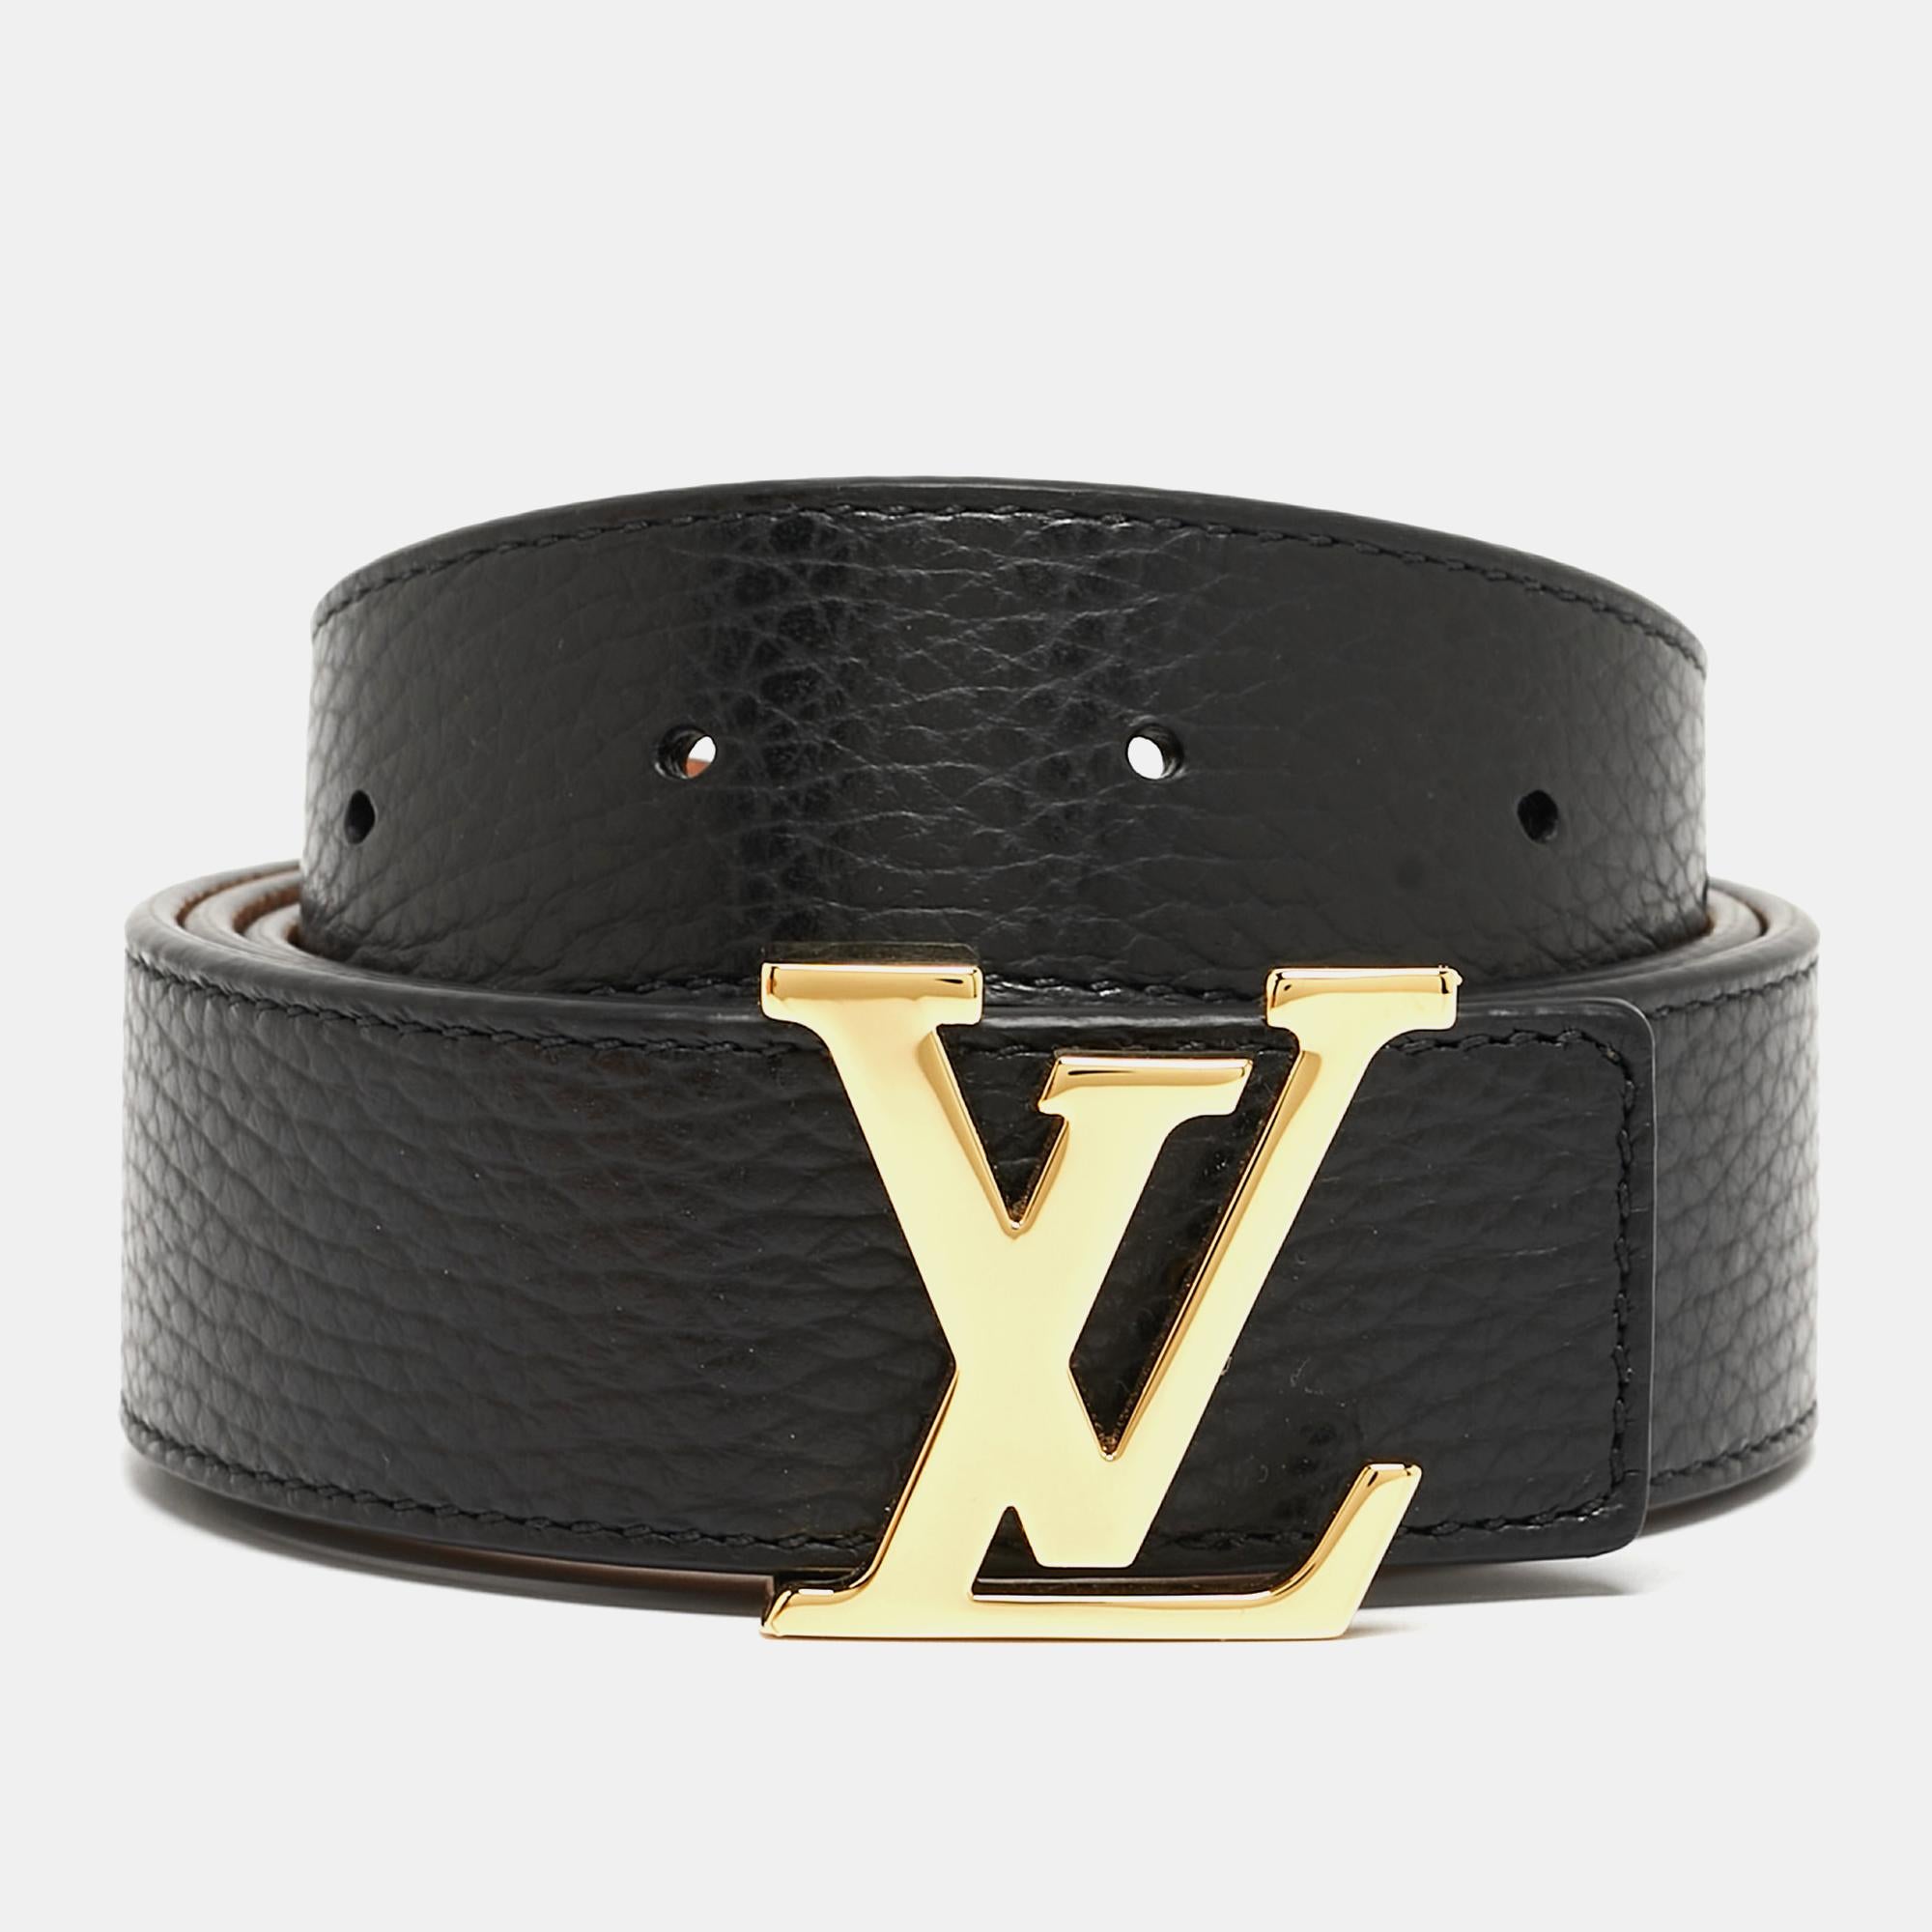 This Louis Vuitton belt has been crafted to a sleek and seamless finish. Made from leather, it features the polished LV logo buckle in gold-tone metal and loopholes for an adjustable fit. Its reversible feature allows you to wear it in black or